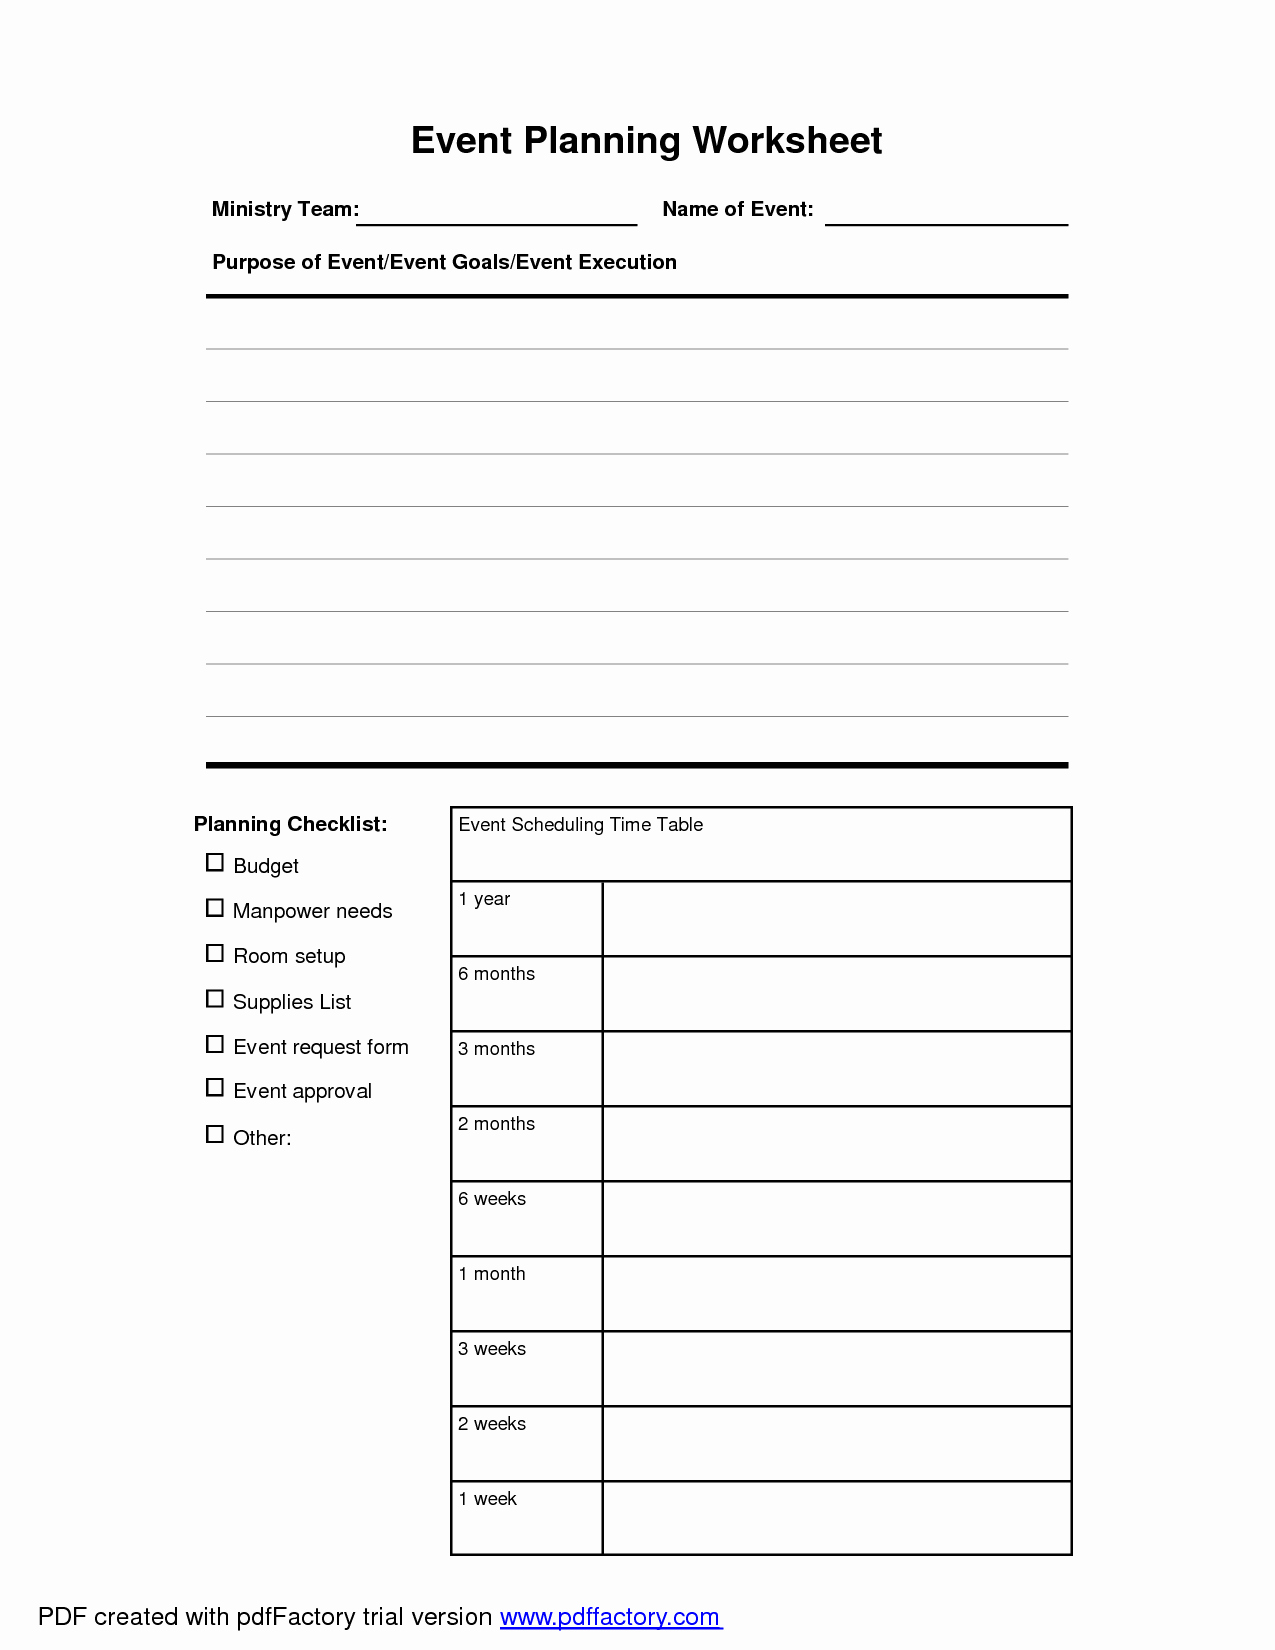 Church event Planning Worksheet Luxury 17 Best Of Career Planning In College Psychology Worksheets Pdf Stages Of Critical